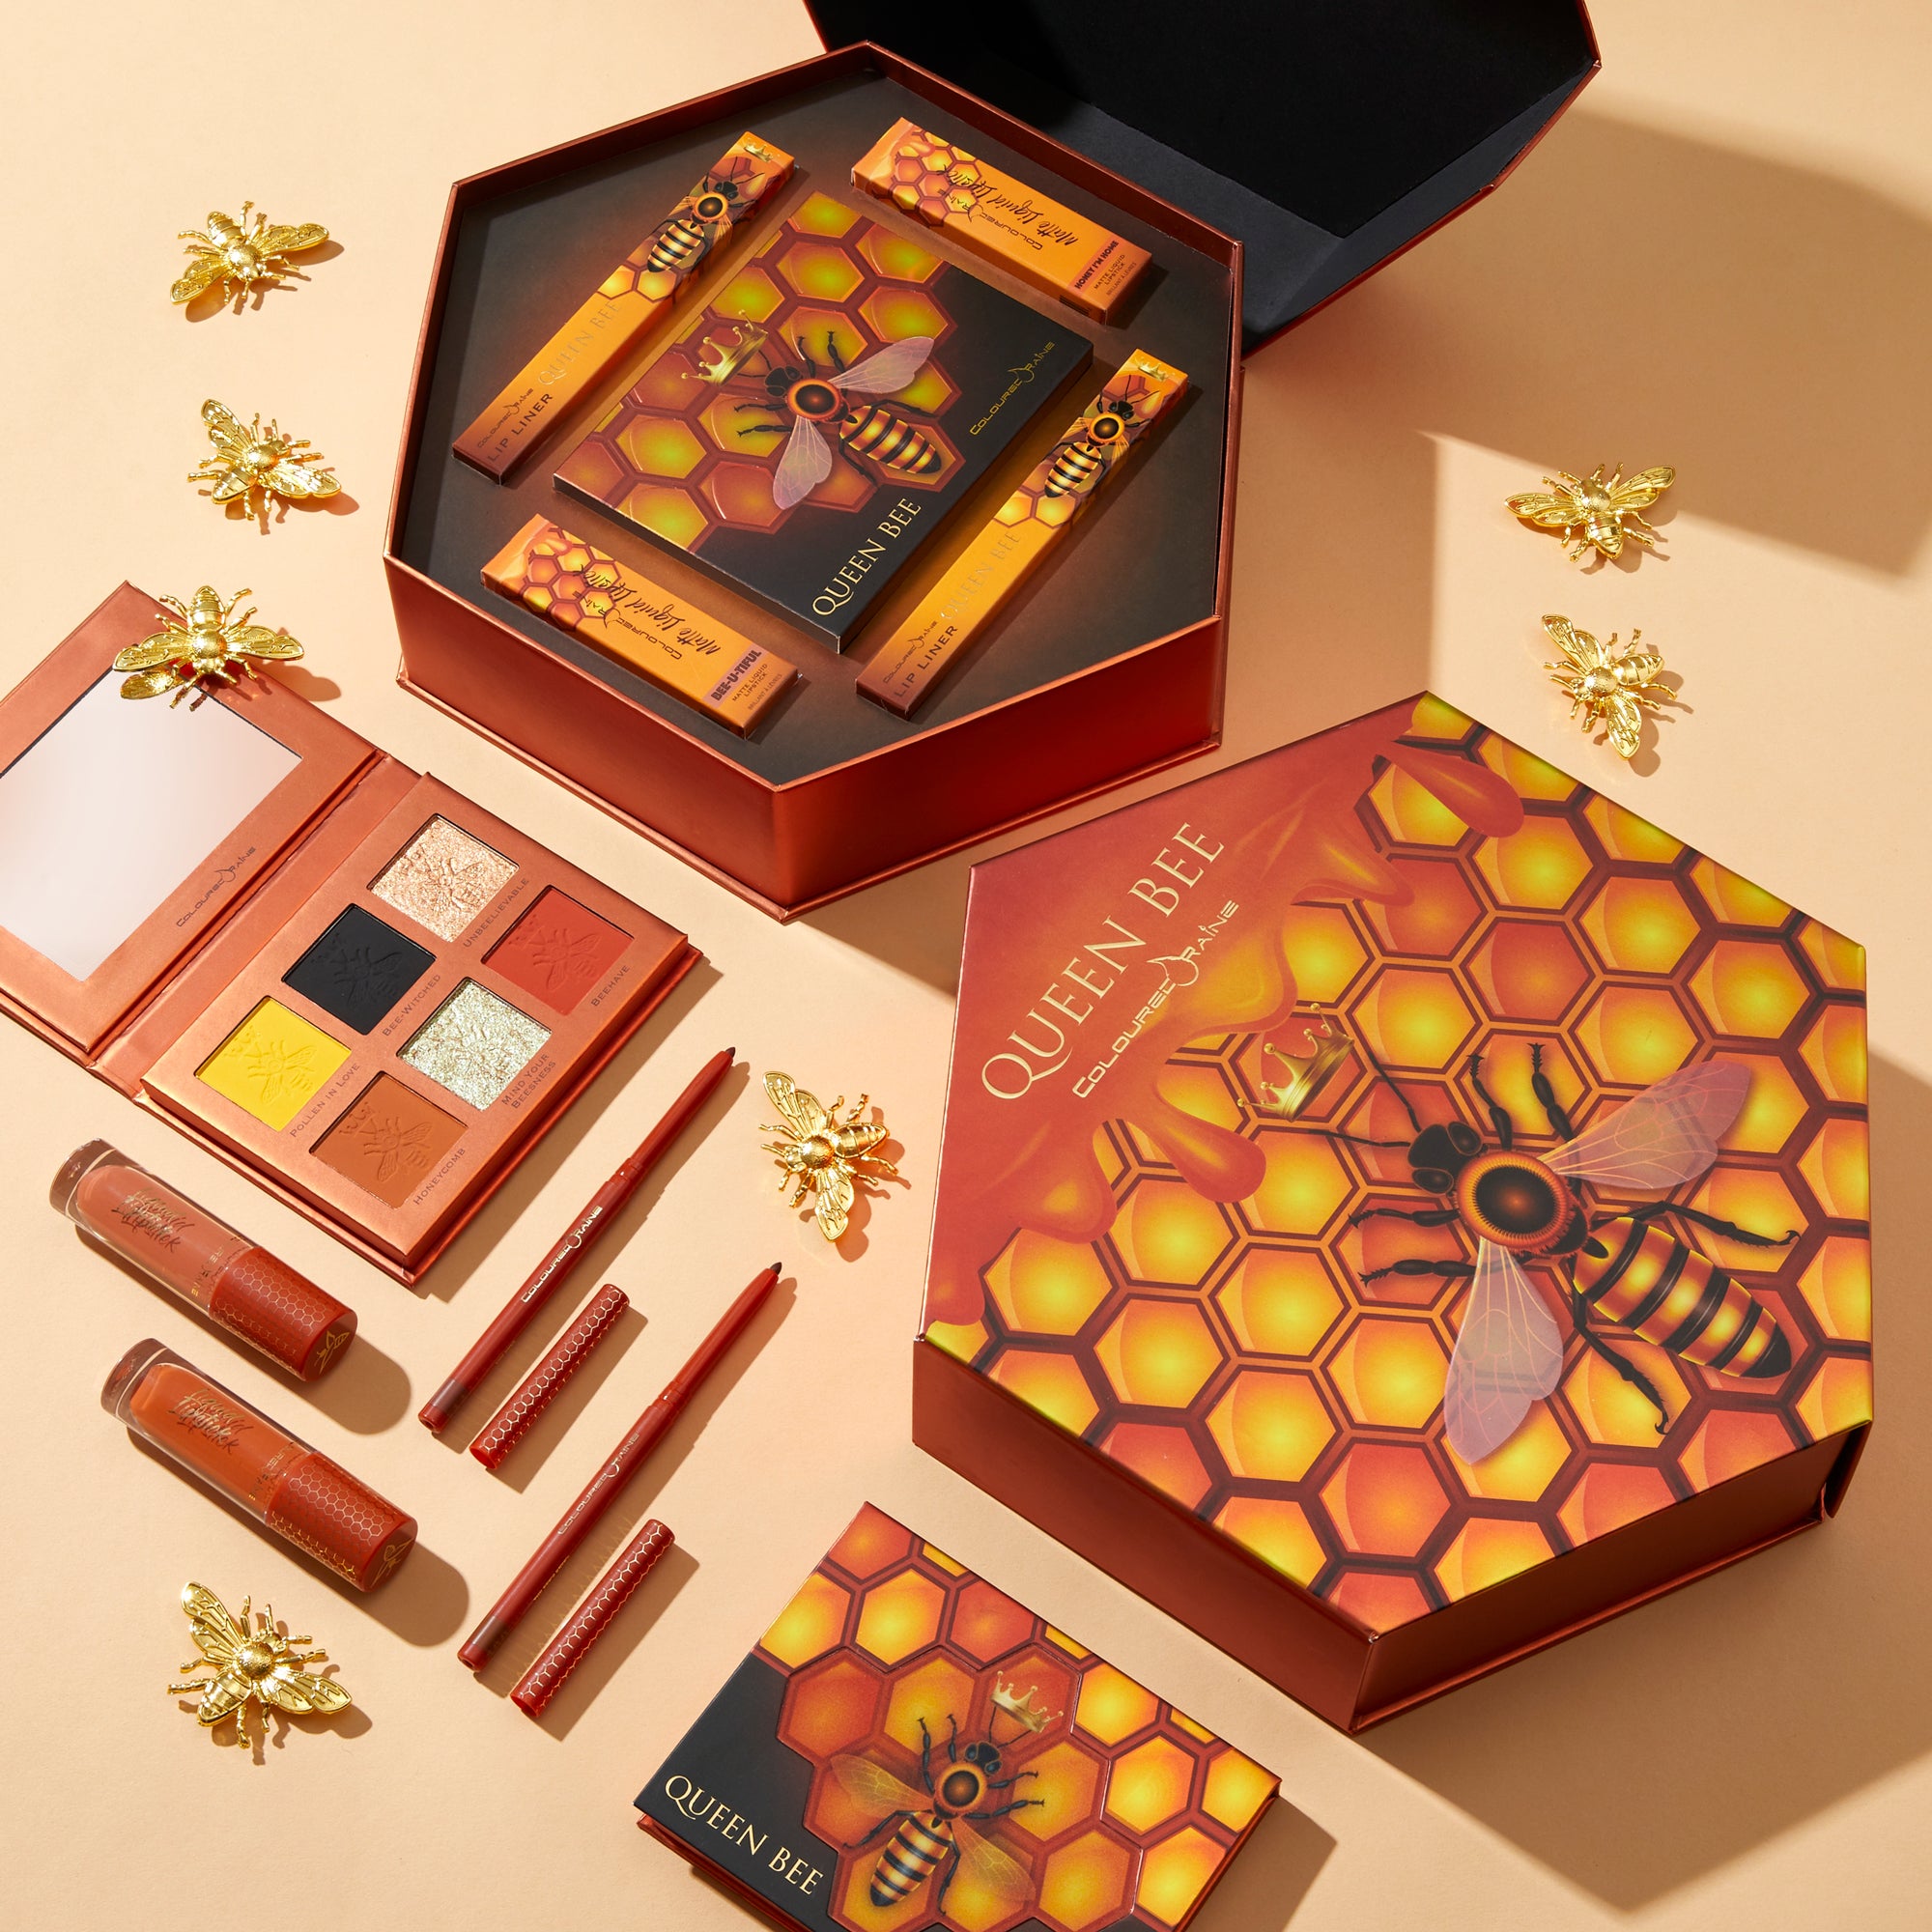 Queen Bee PR Box Collection (Limited Edition) - Coloured Raine Cosmetics